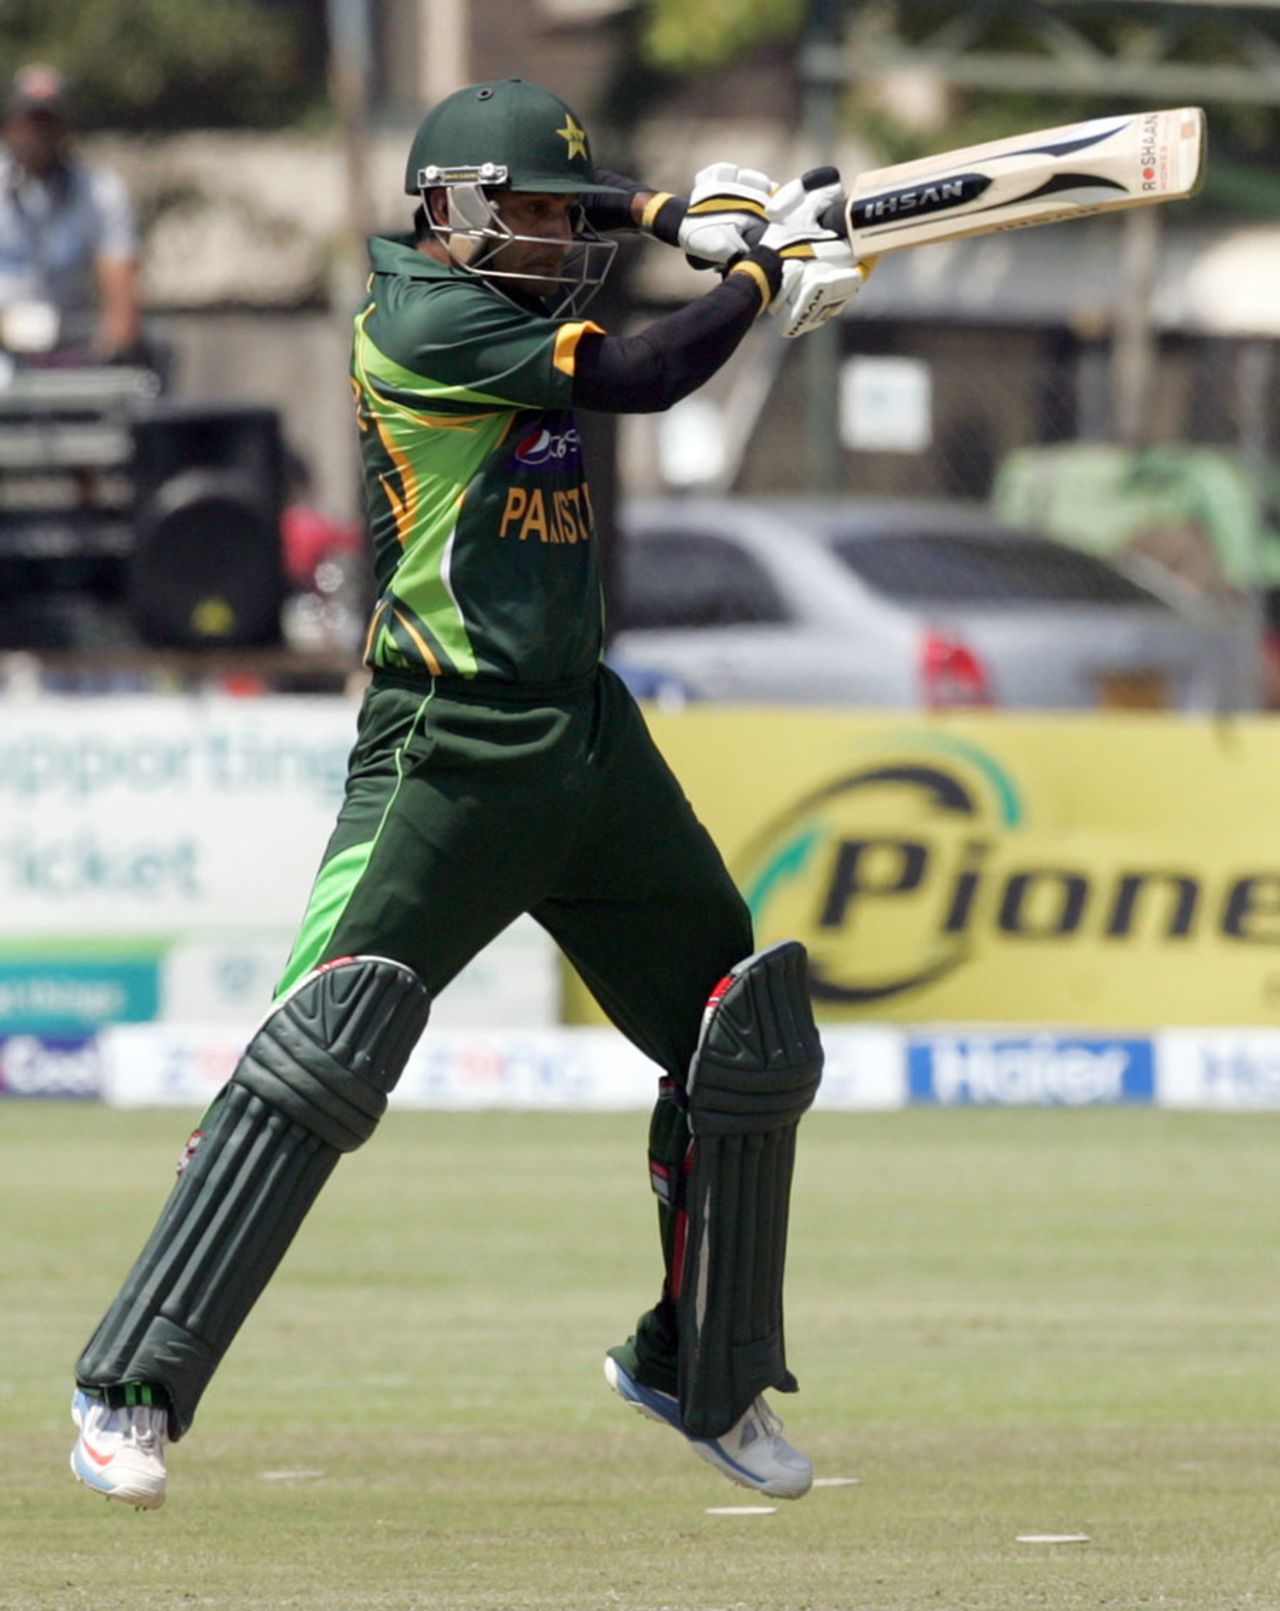 Mohammad Hafeez anchored the innings with an unbeaten 136, Zimbabwe v Pakistan, 2nd ODI, Harare, August 29, 2013